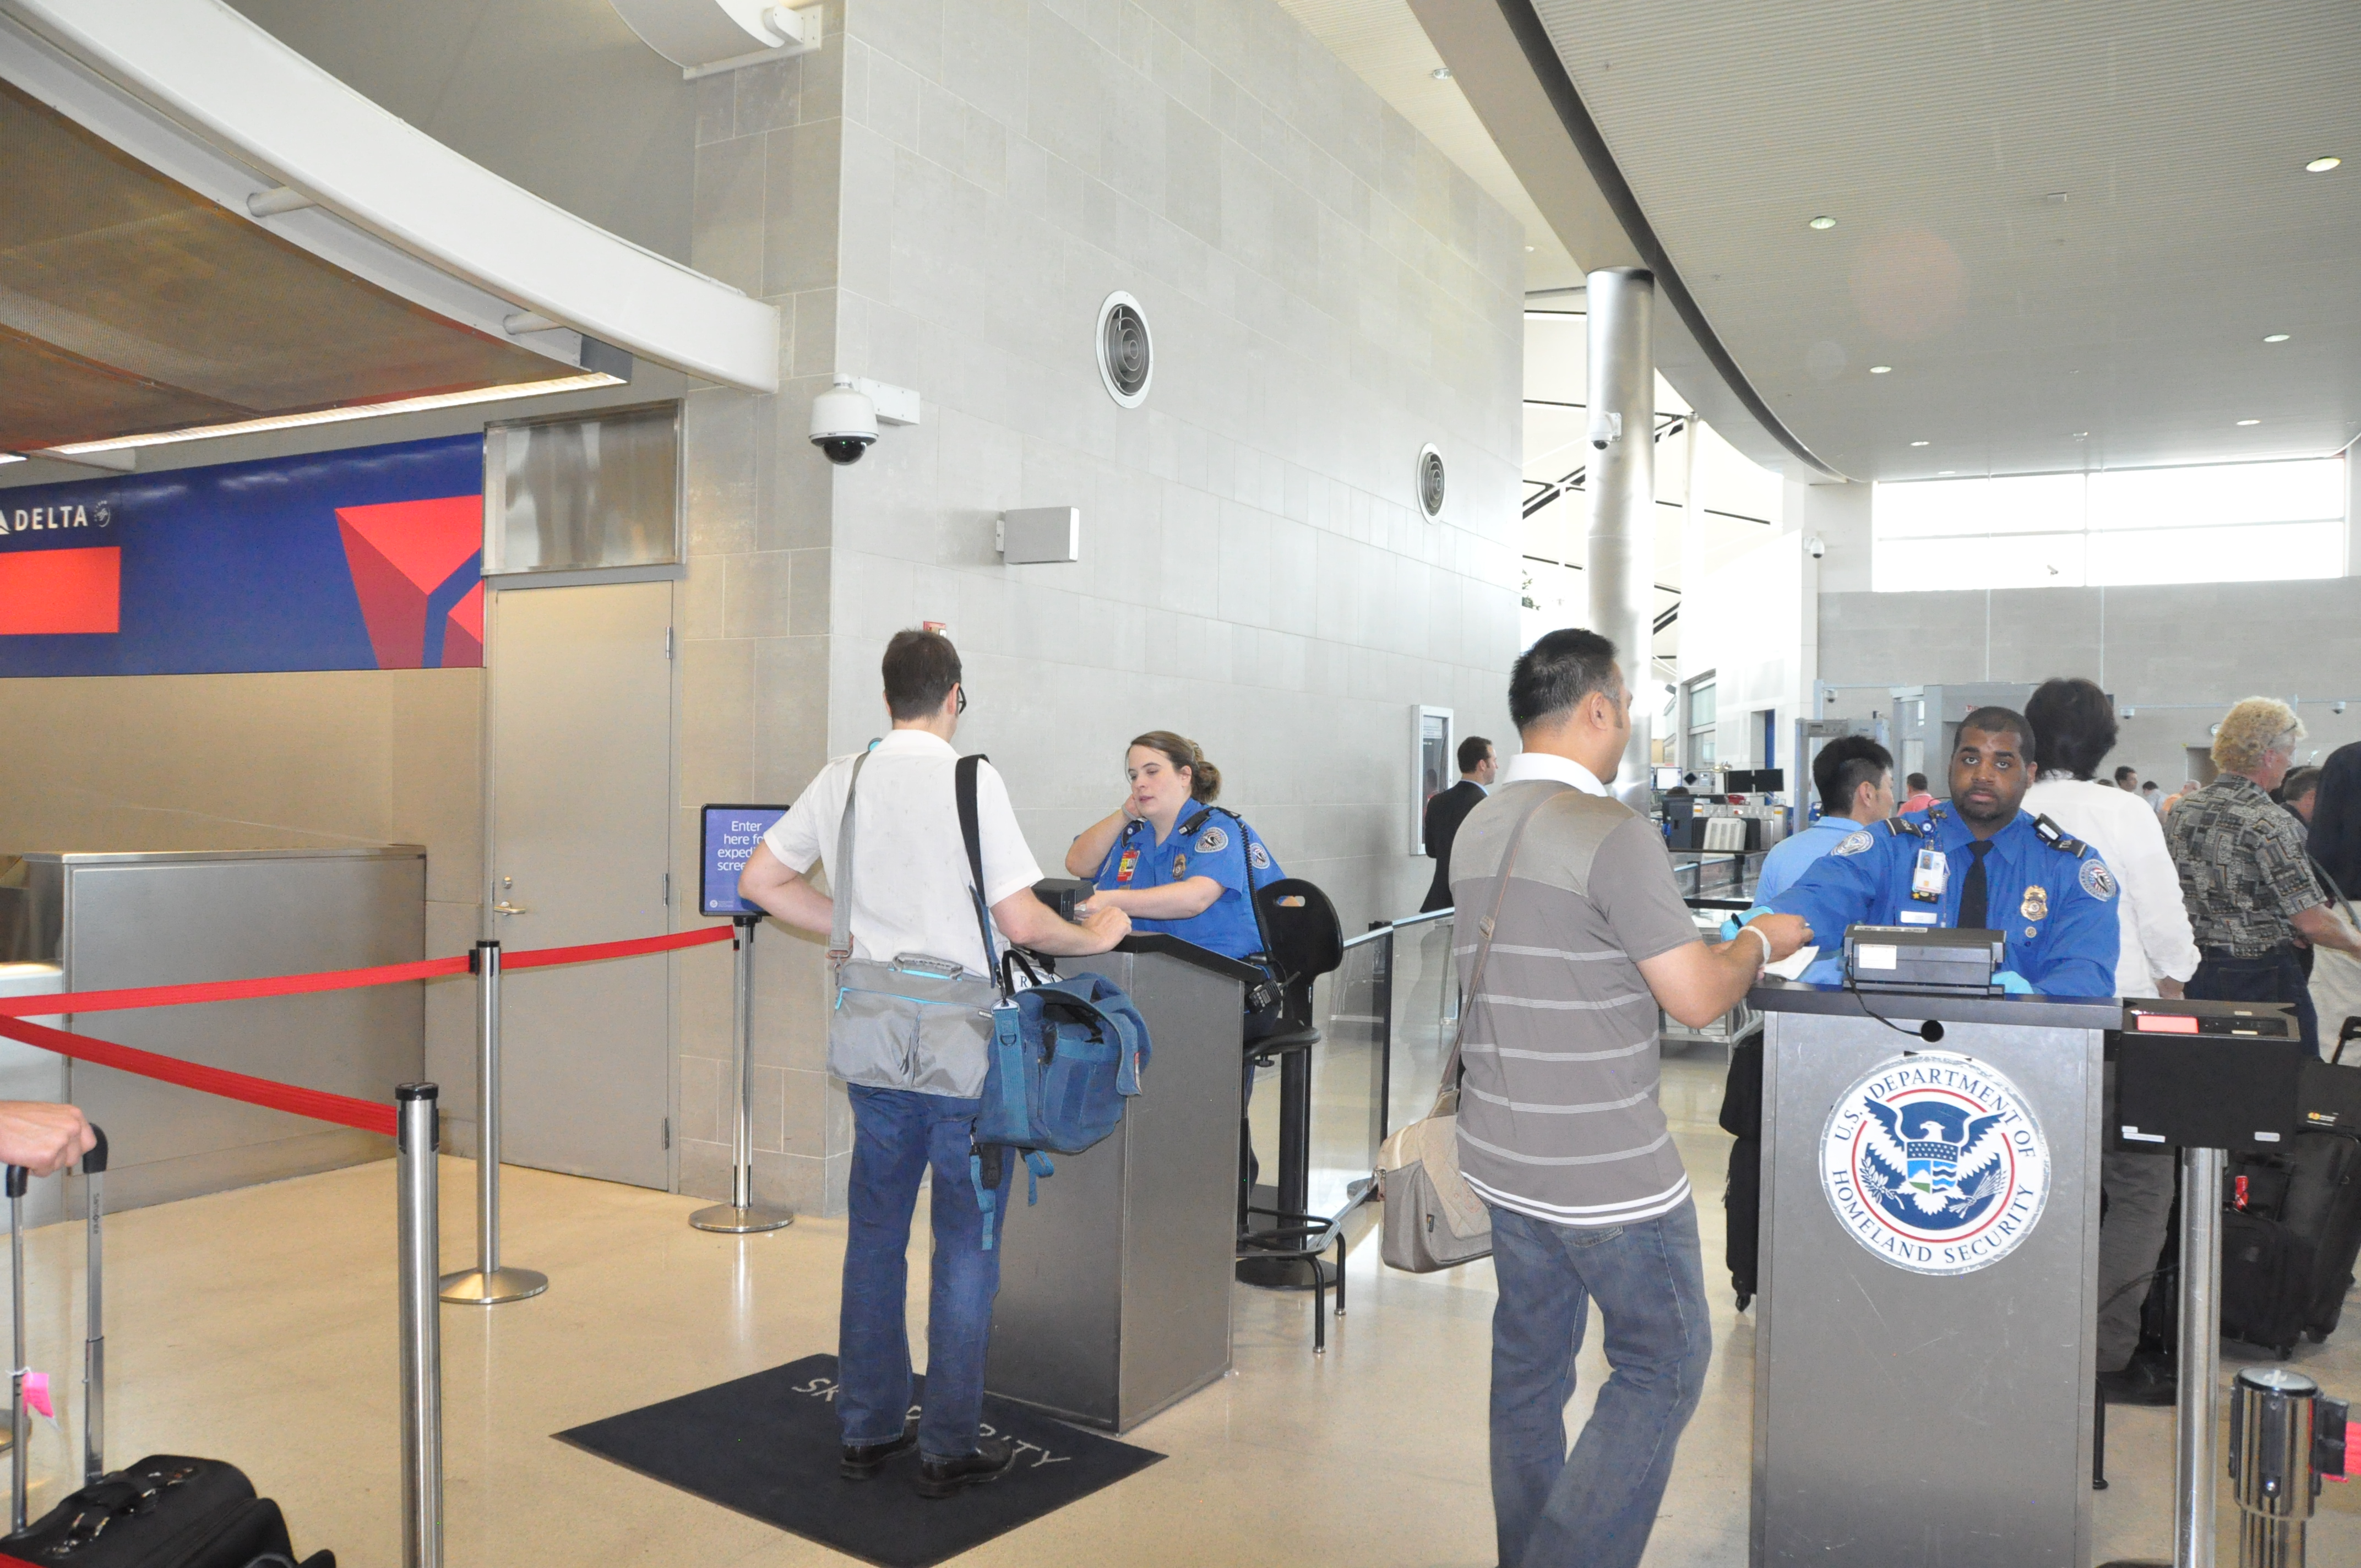  Through Security Faster with TSA PreCheck – Review and Report